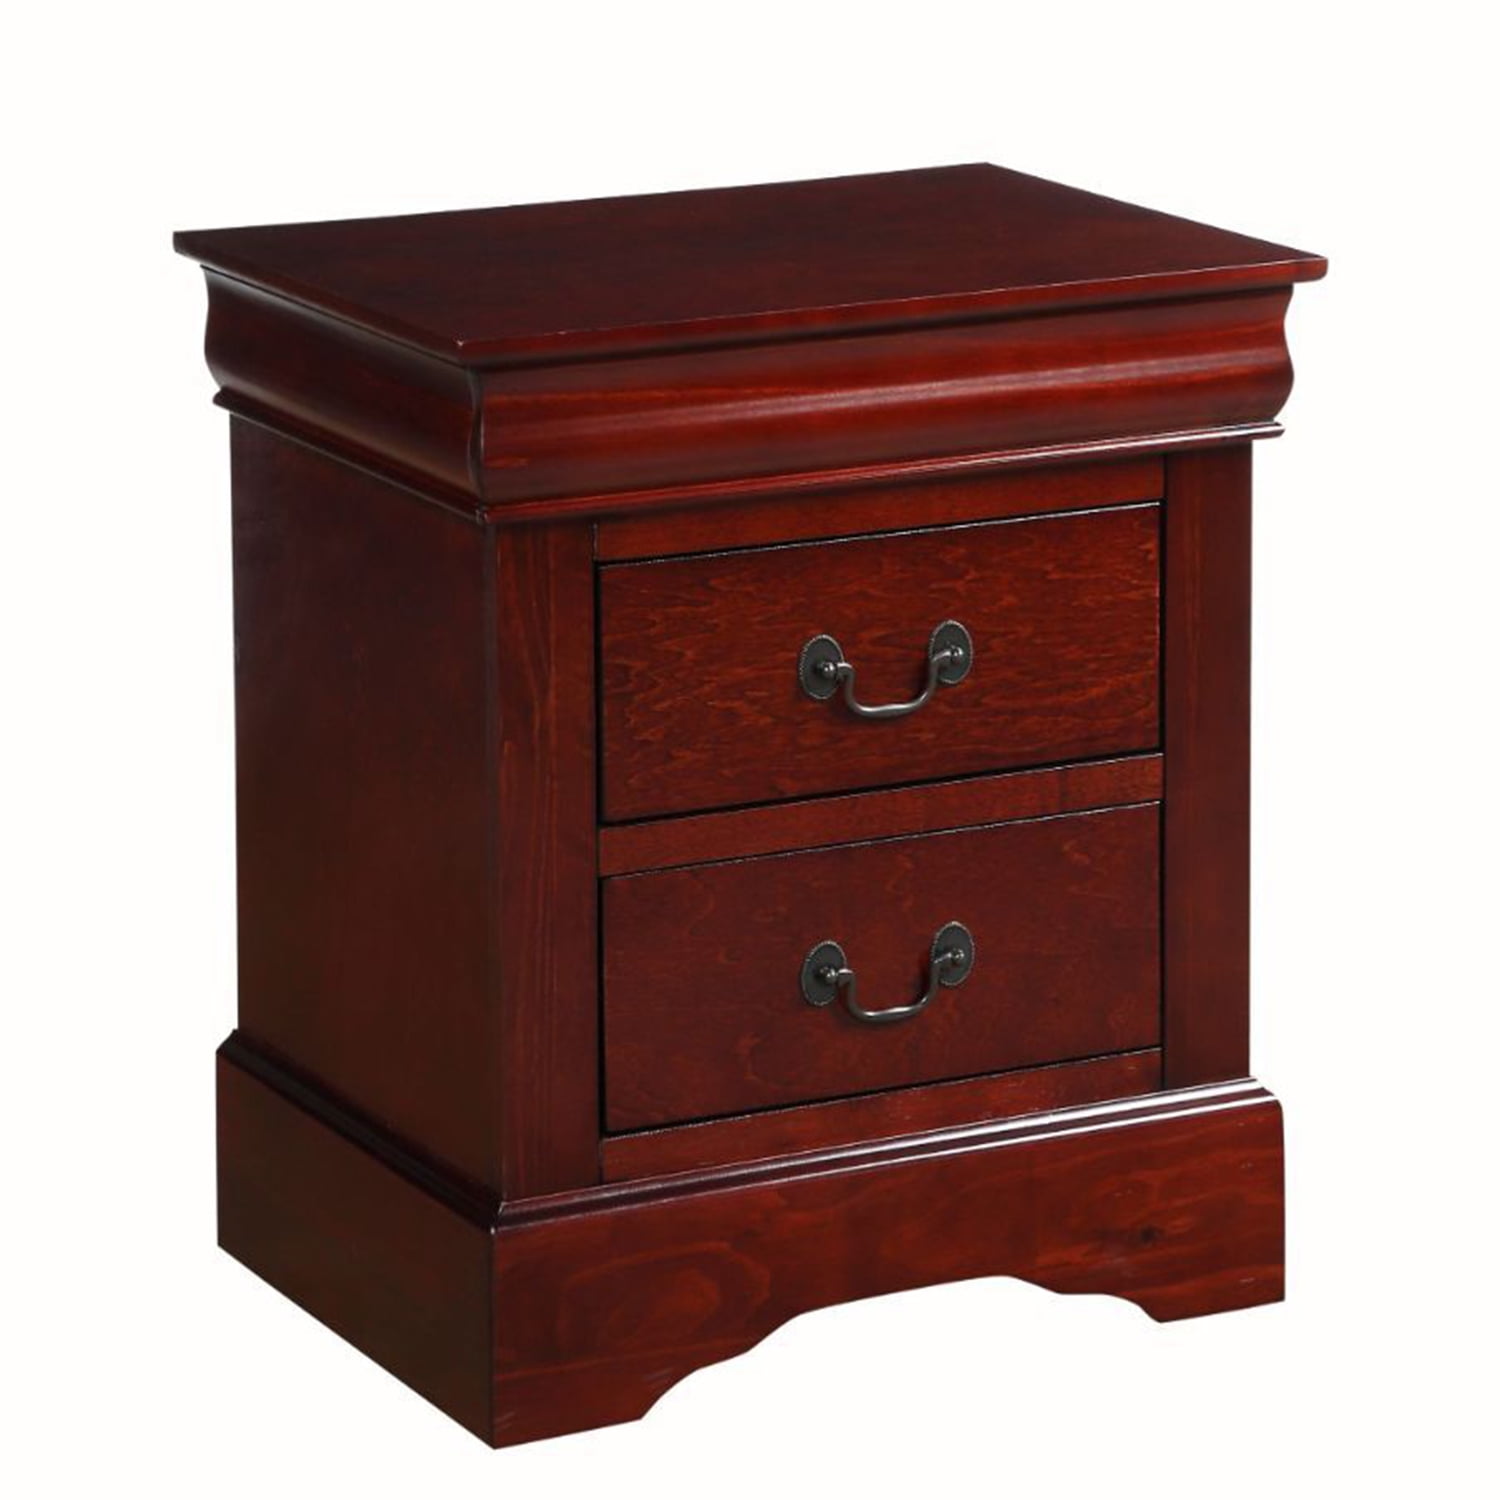 ACME Furniture Louis Philippe III 2 Drawer Bedroom Wood Chest